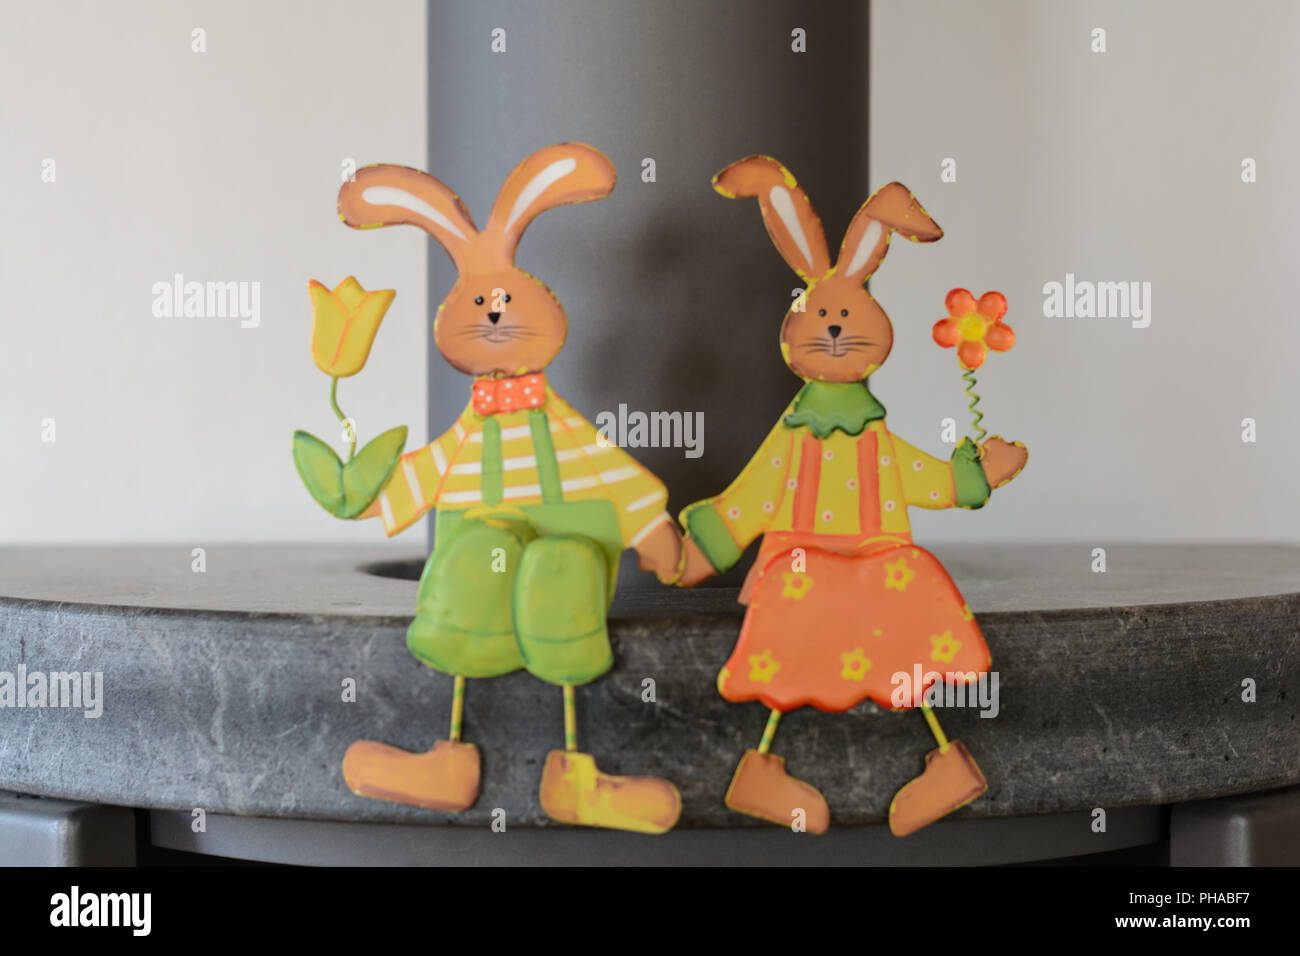 Friendly Easter bunnies hold flowers and sit on stove Stock Photo